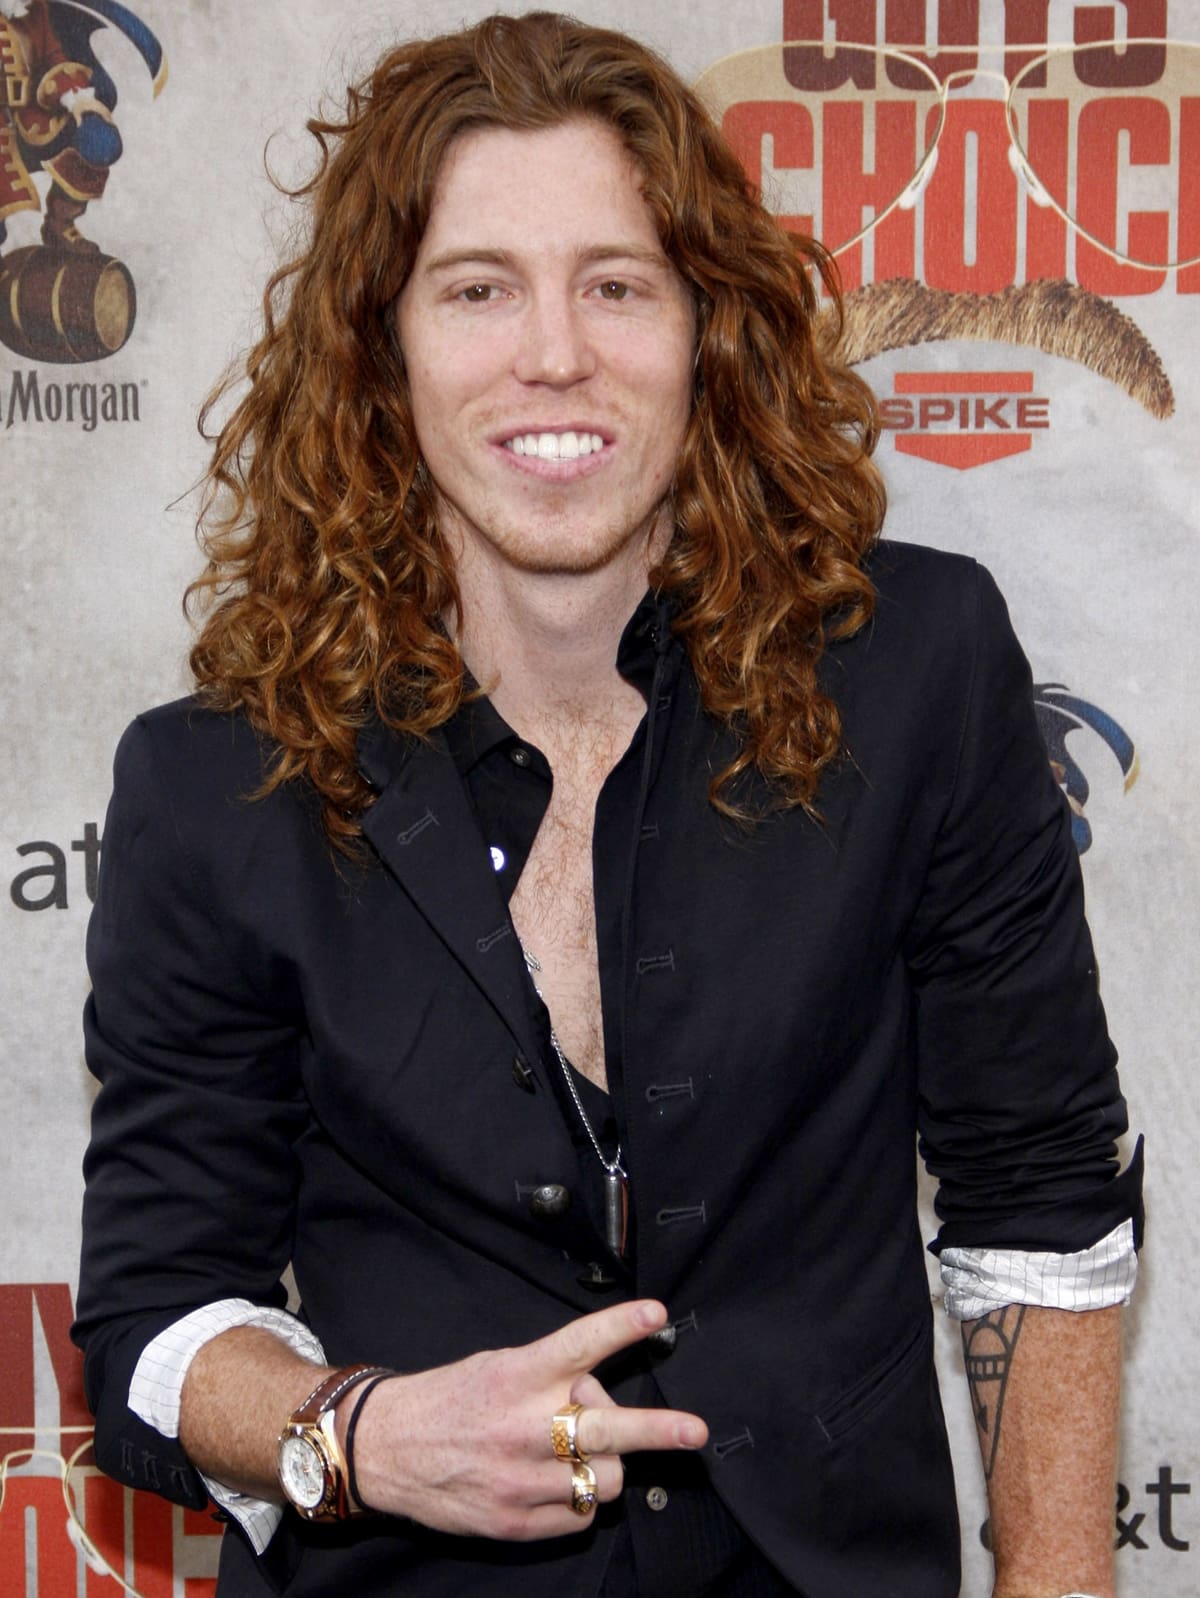 Shaun White with his signature red curly hair at Spike TV's 4th Annual "Guys Choice Awards"